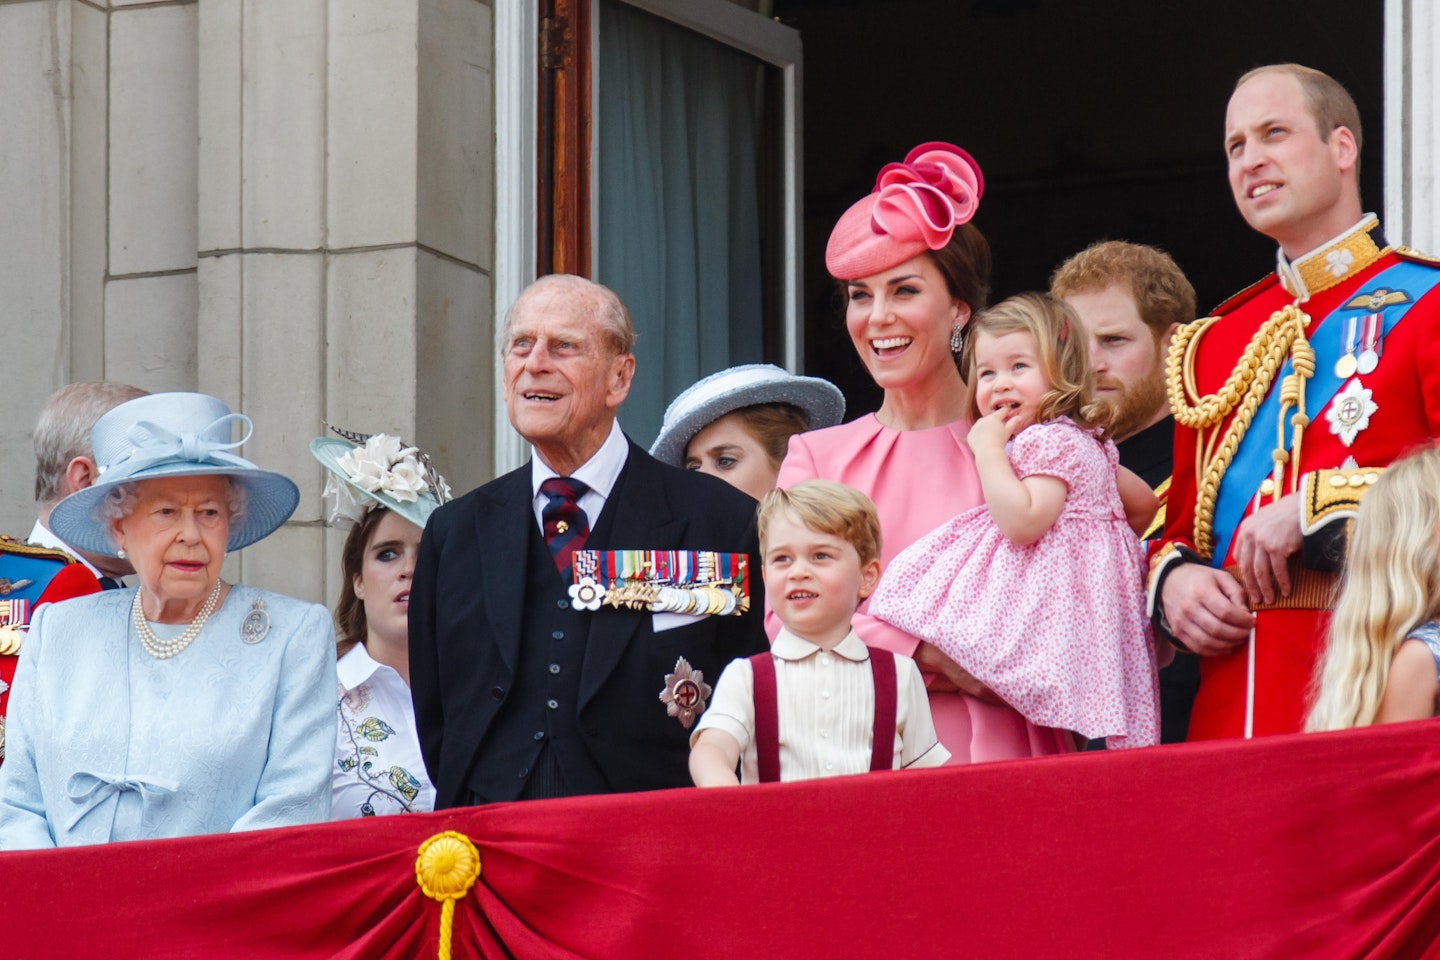 Royal family trooping the colour.